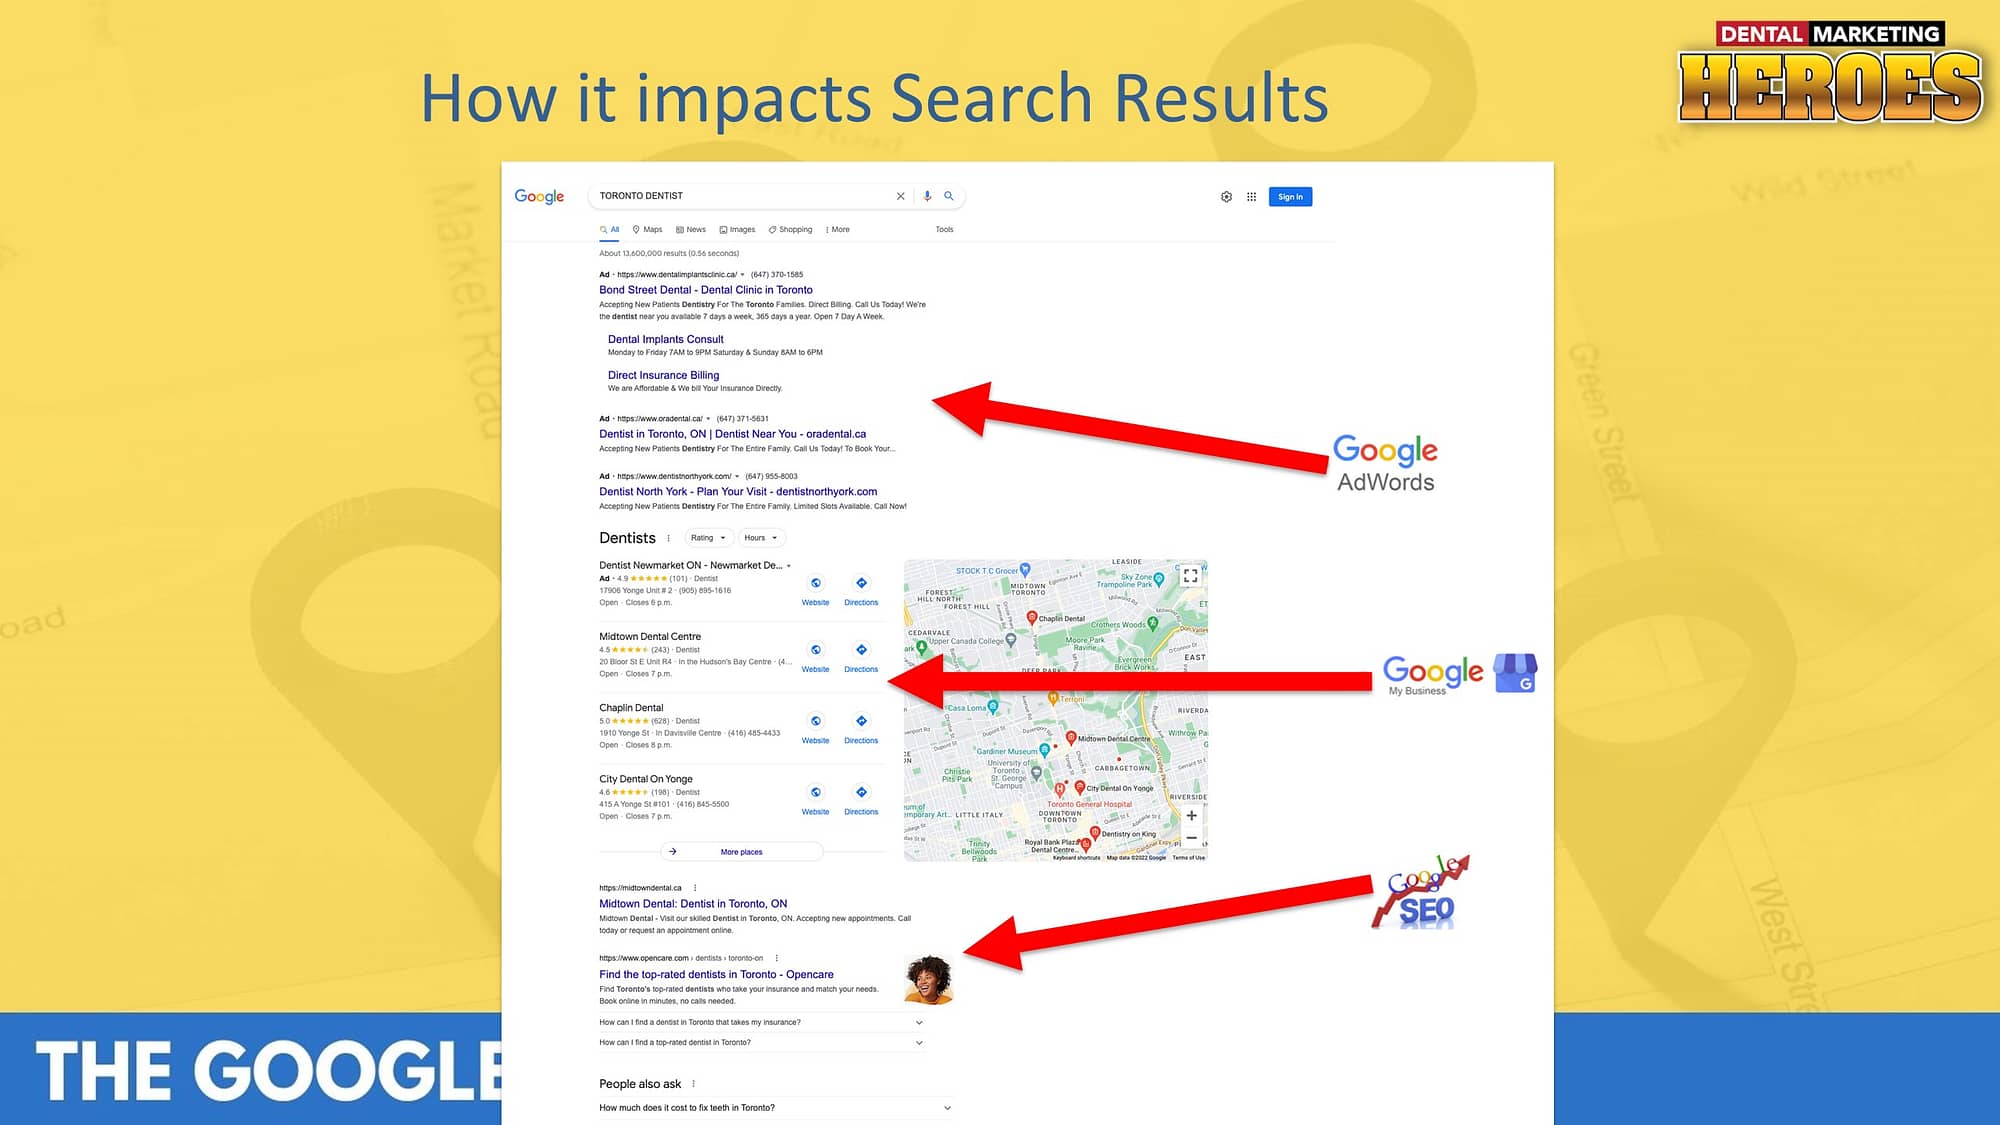 How do changes to Google Maps impact search results